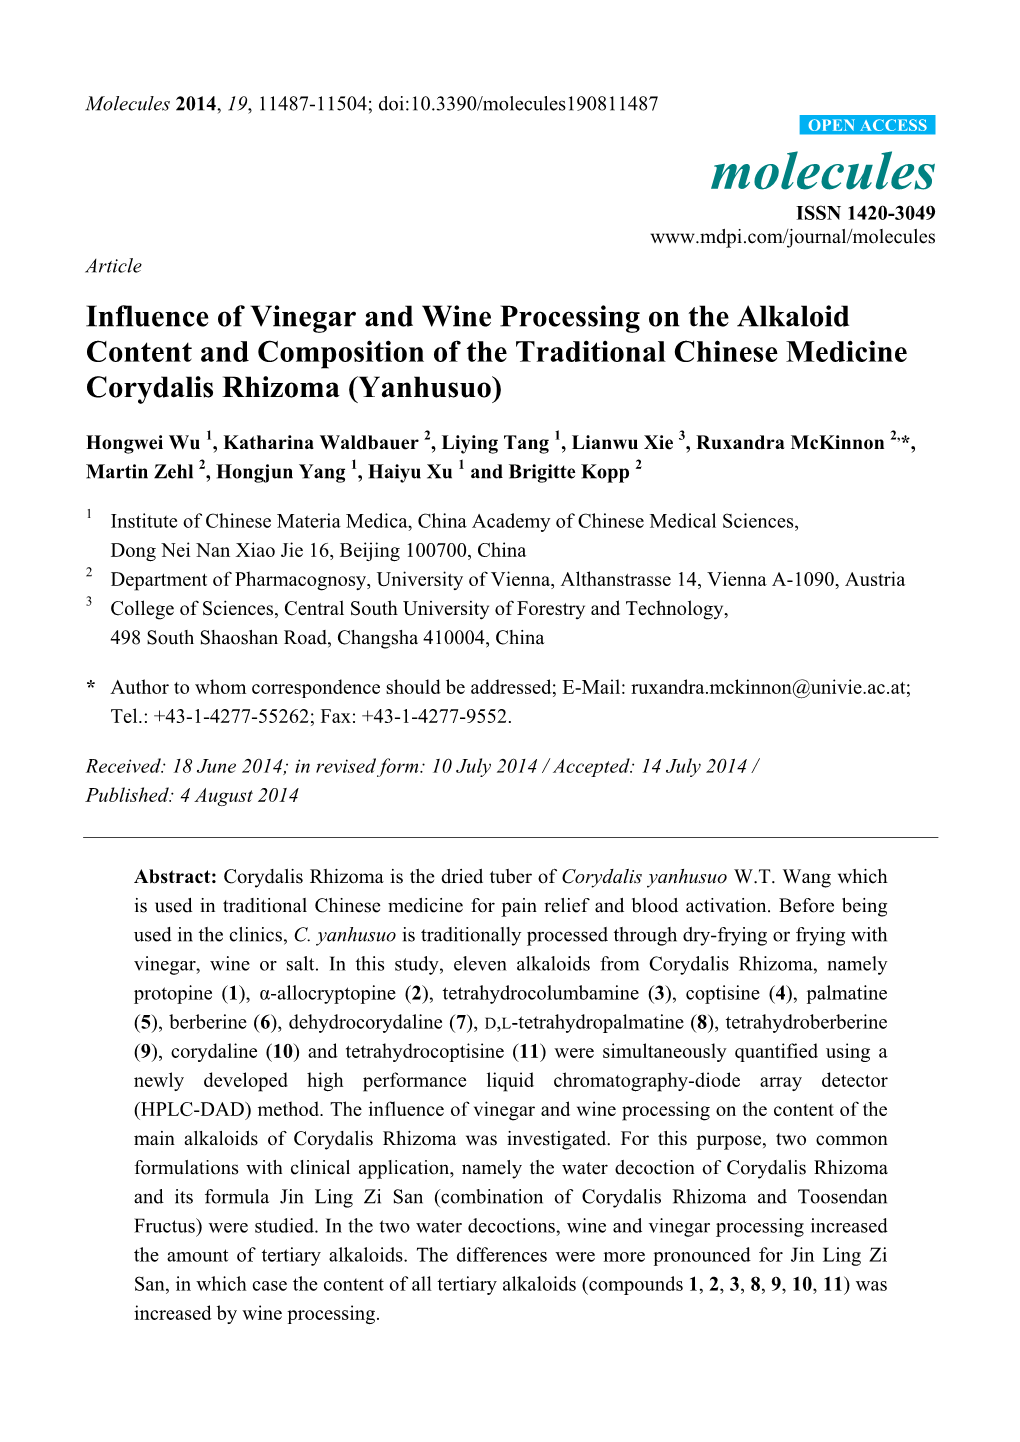 Influence of Vinegar and Wine Processing on the Alkaloid Content and Composition of the Traditional Chinese Medicine Corydalis Rhizoma (Yanhusuo)